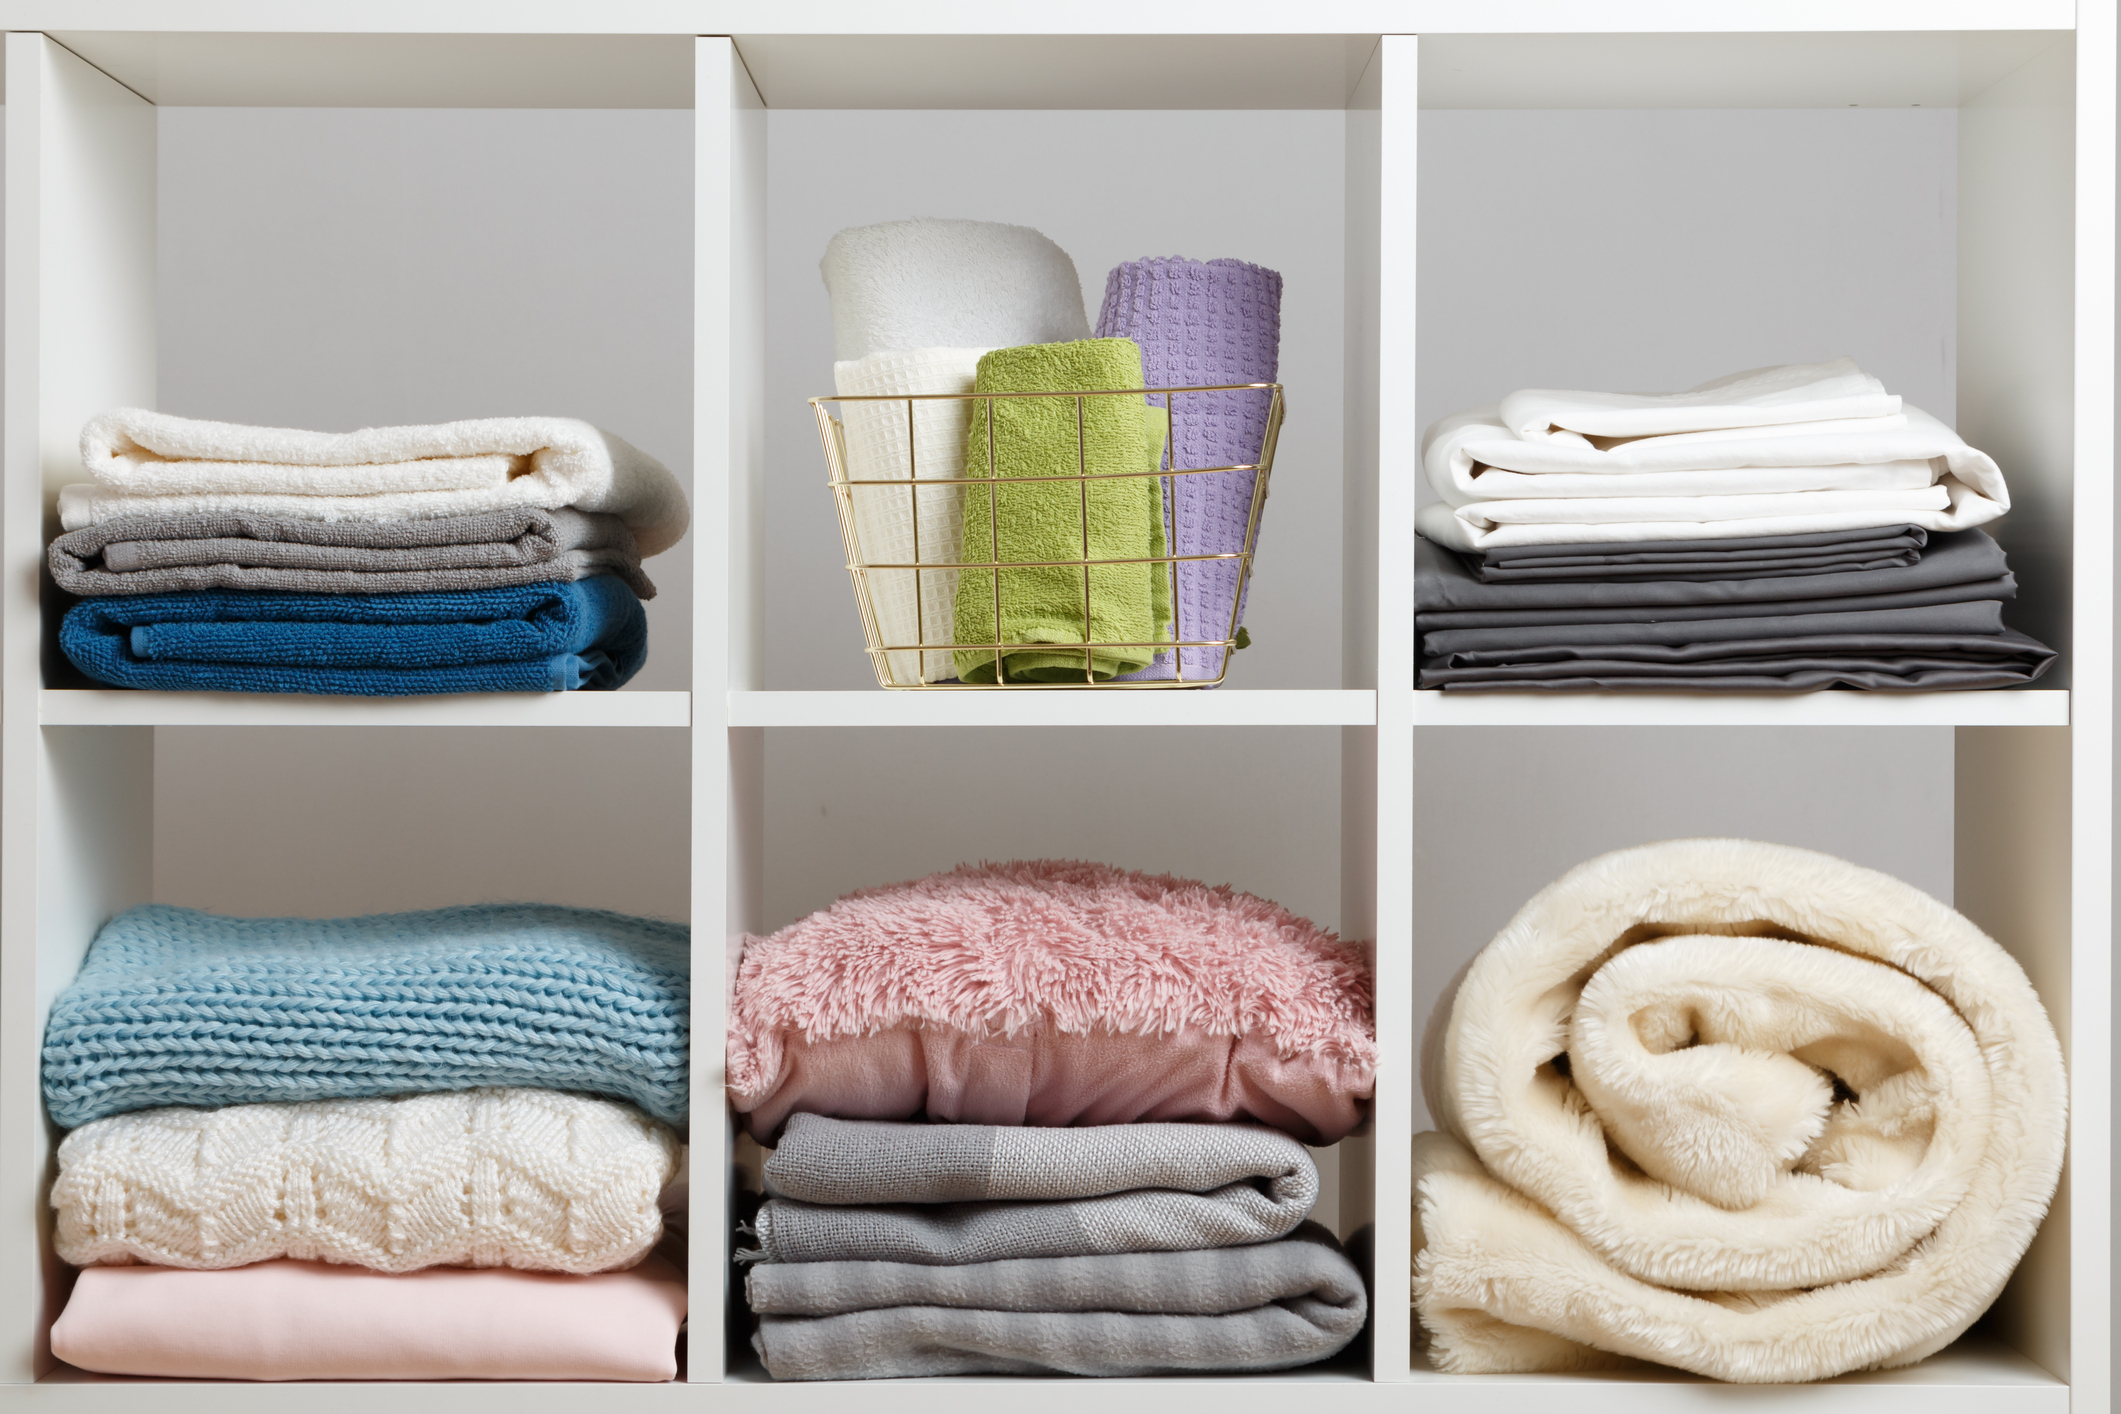 Small Linen Closet Organization Ideas and a Make Over - Almost Practical